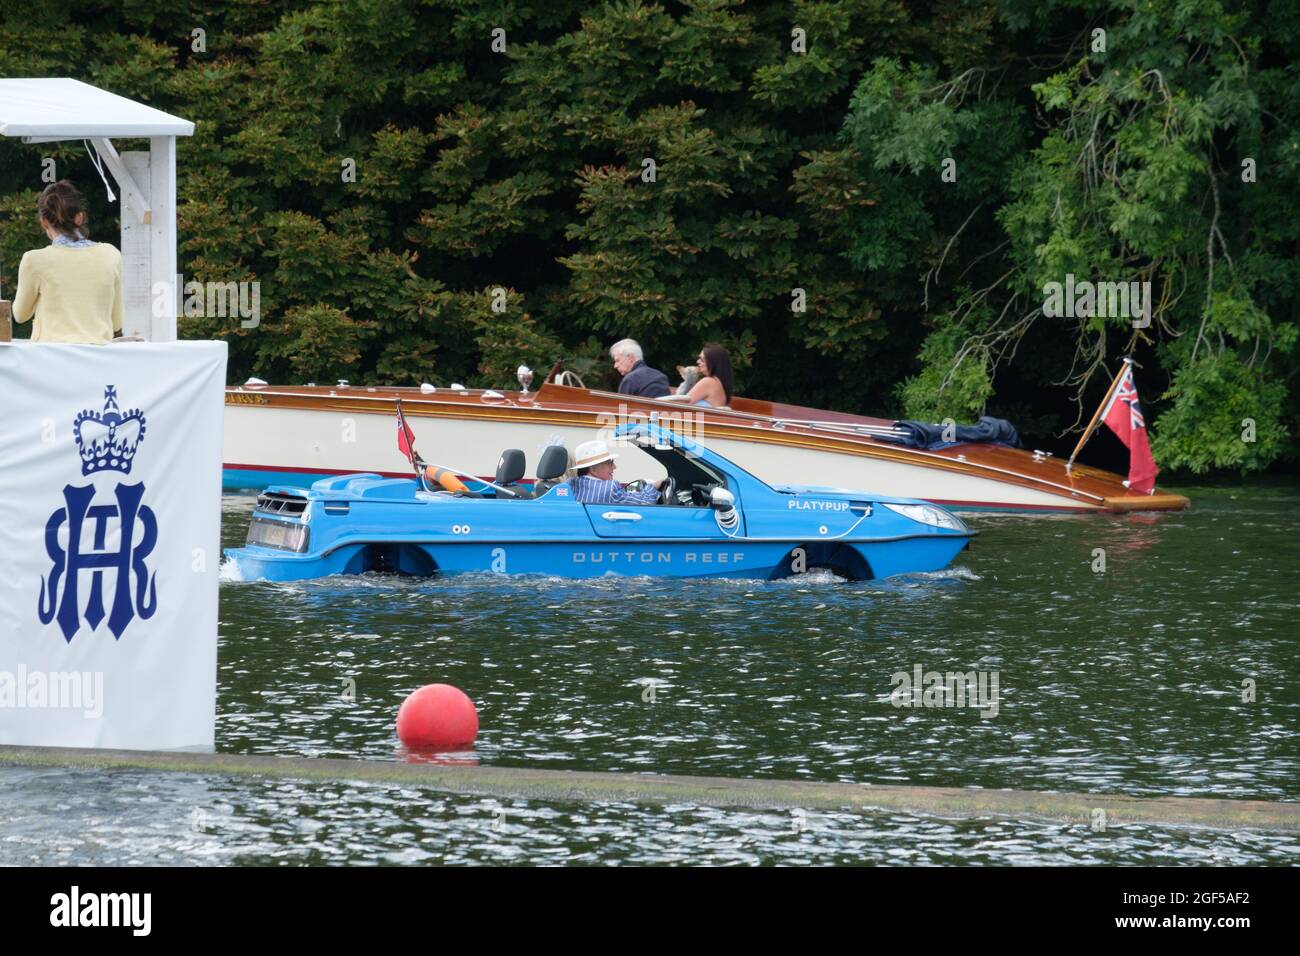 A Dutton Reef amphibious car in the river at Henley Royal Regatta 2021 on the River Thames Stock Photo